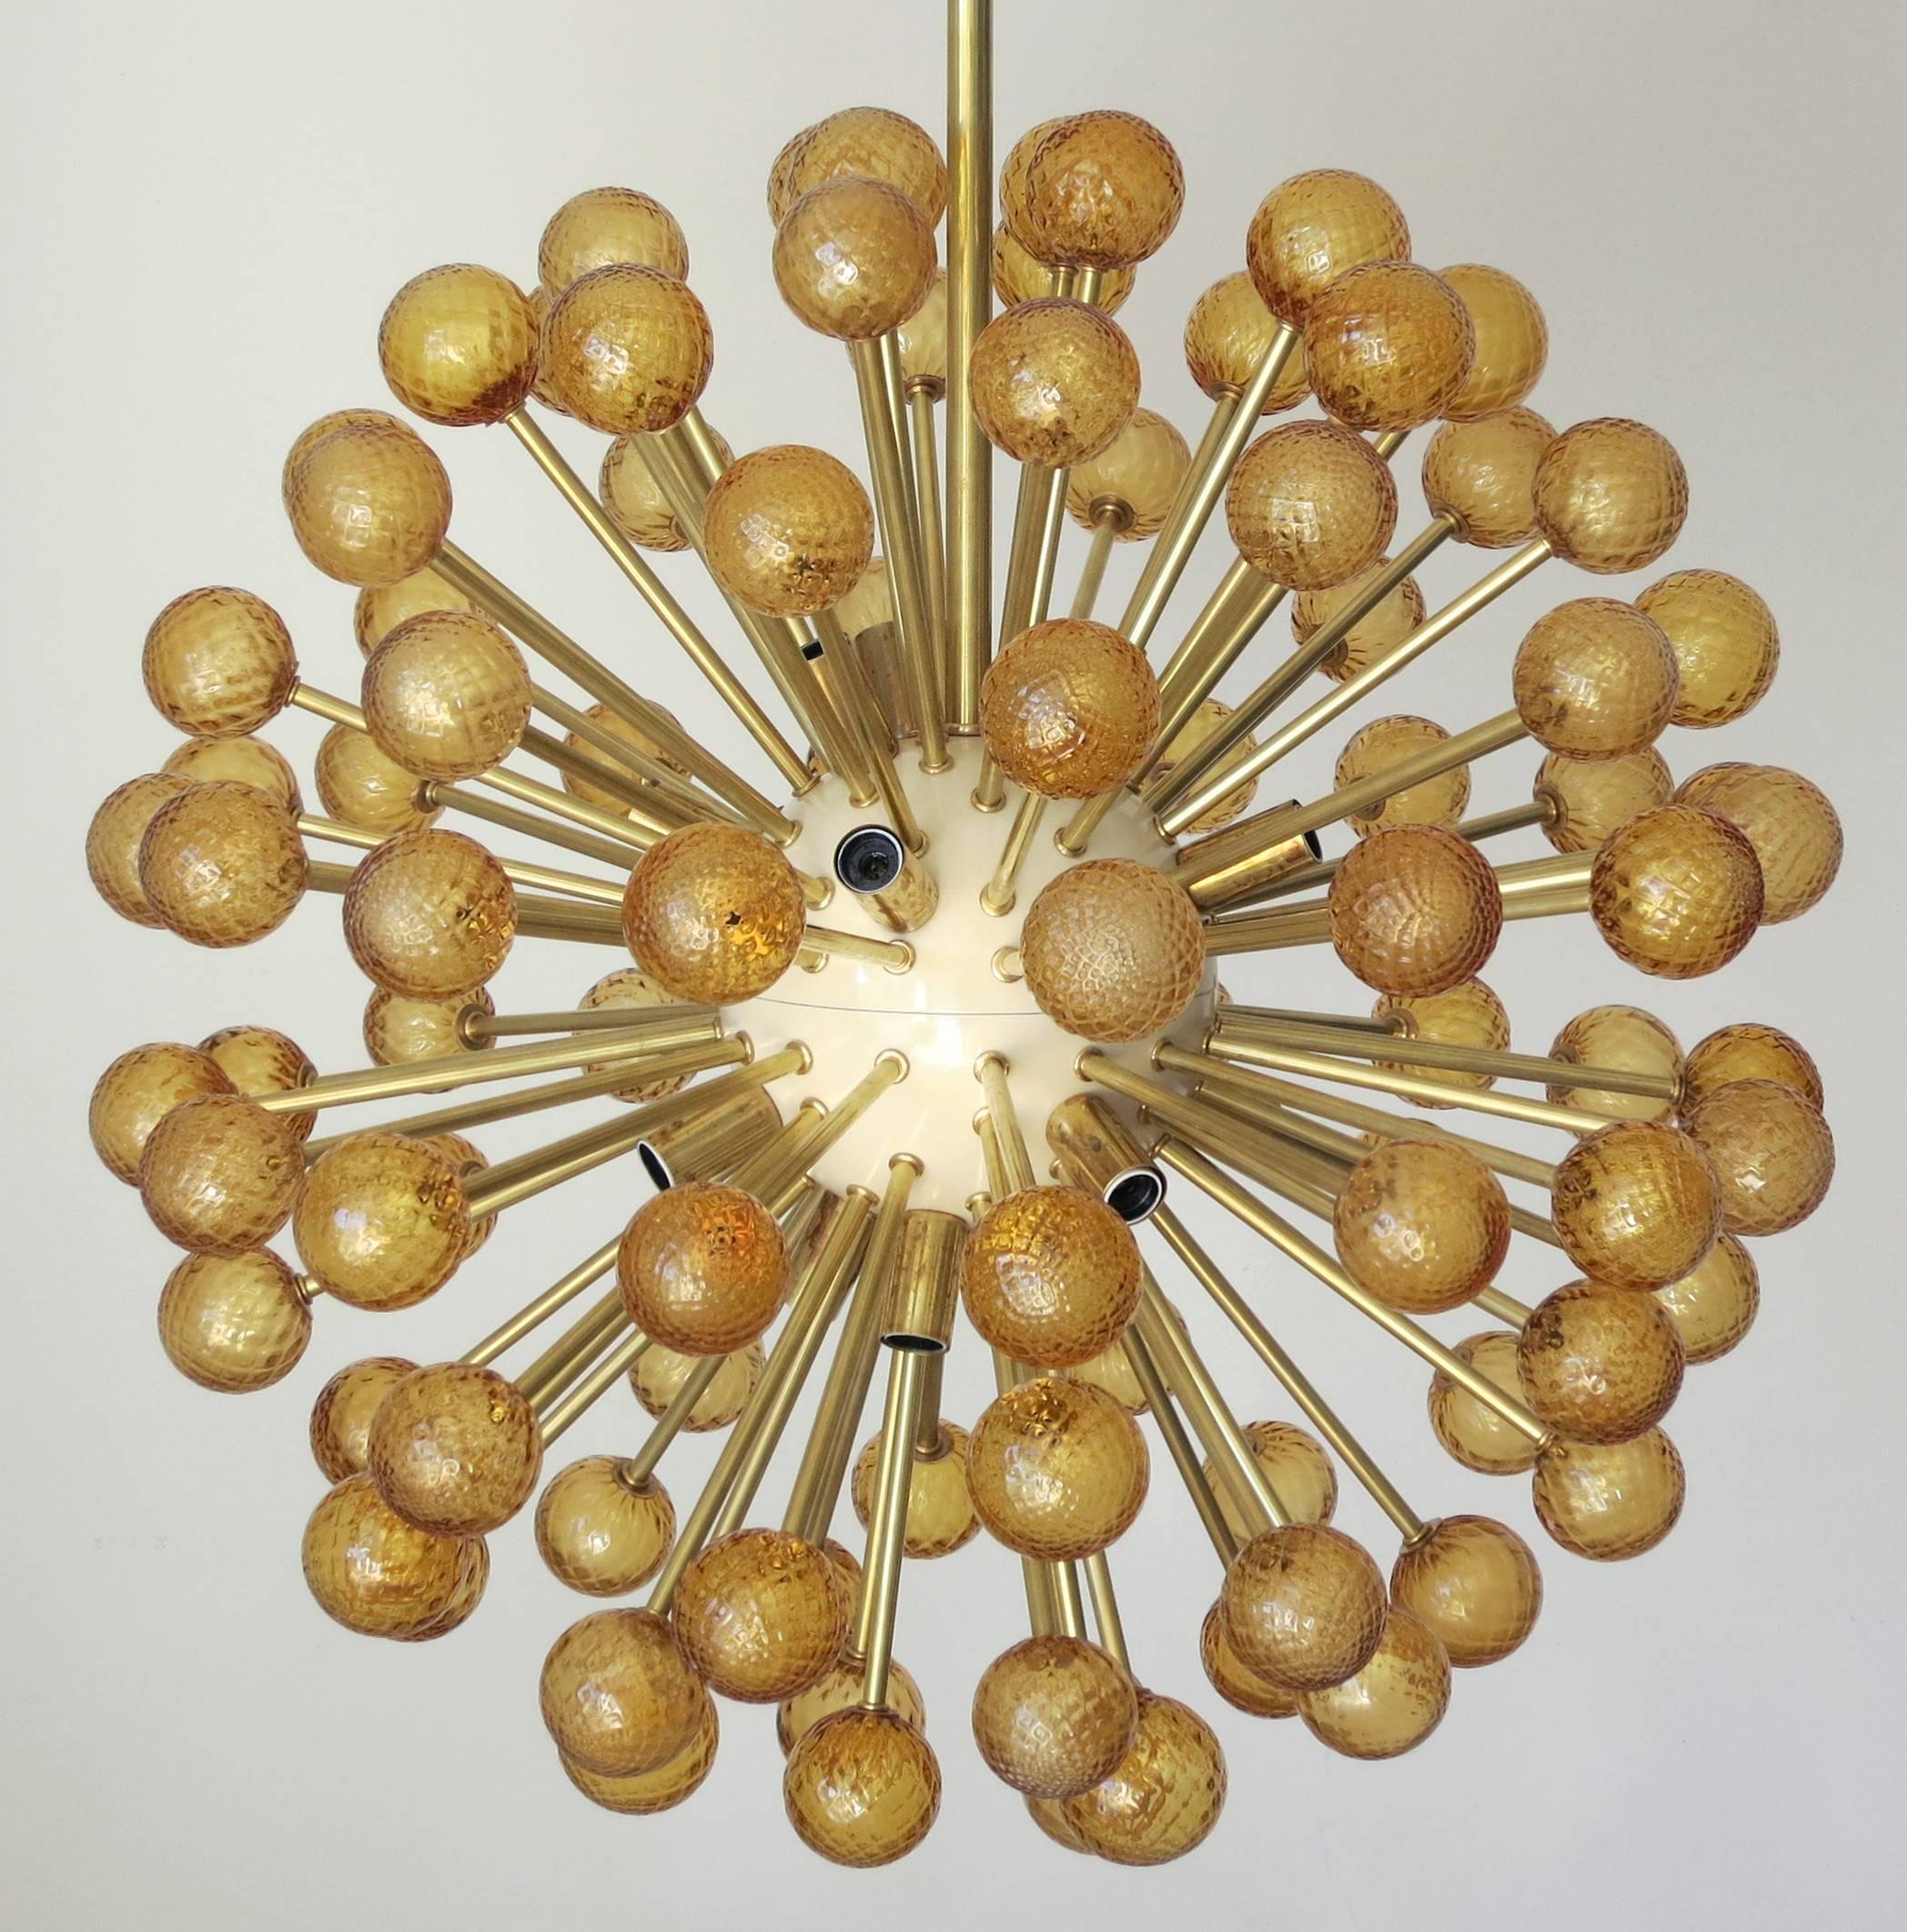 Italian modern sputnik chandelier with hand blown textured Amber Murano glass spheres, mounted on brass frame with cream enameled center / Designed by Fabio Bergomi for Fabio Ltd / Made in Italy 
16 lights / E12 type / max 40W each
Diameter: 30.5